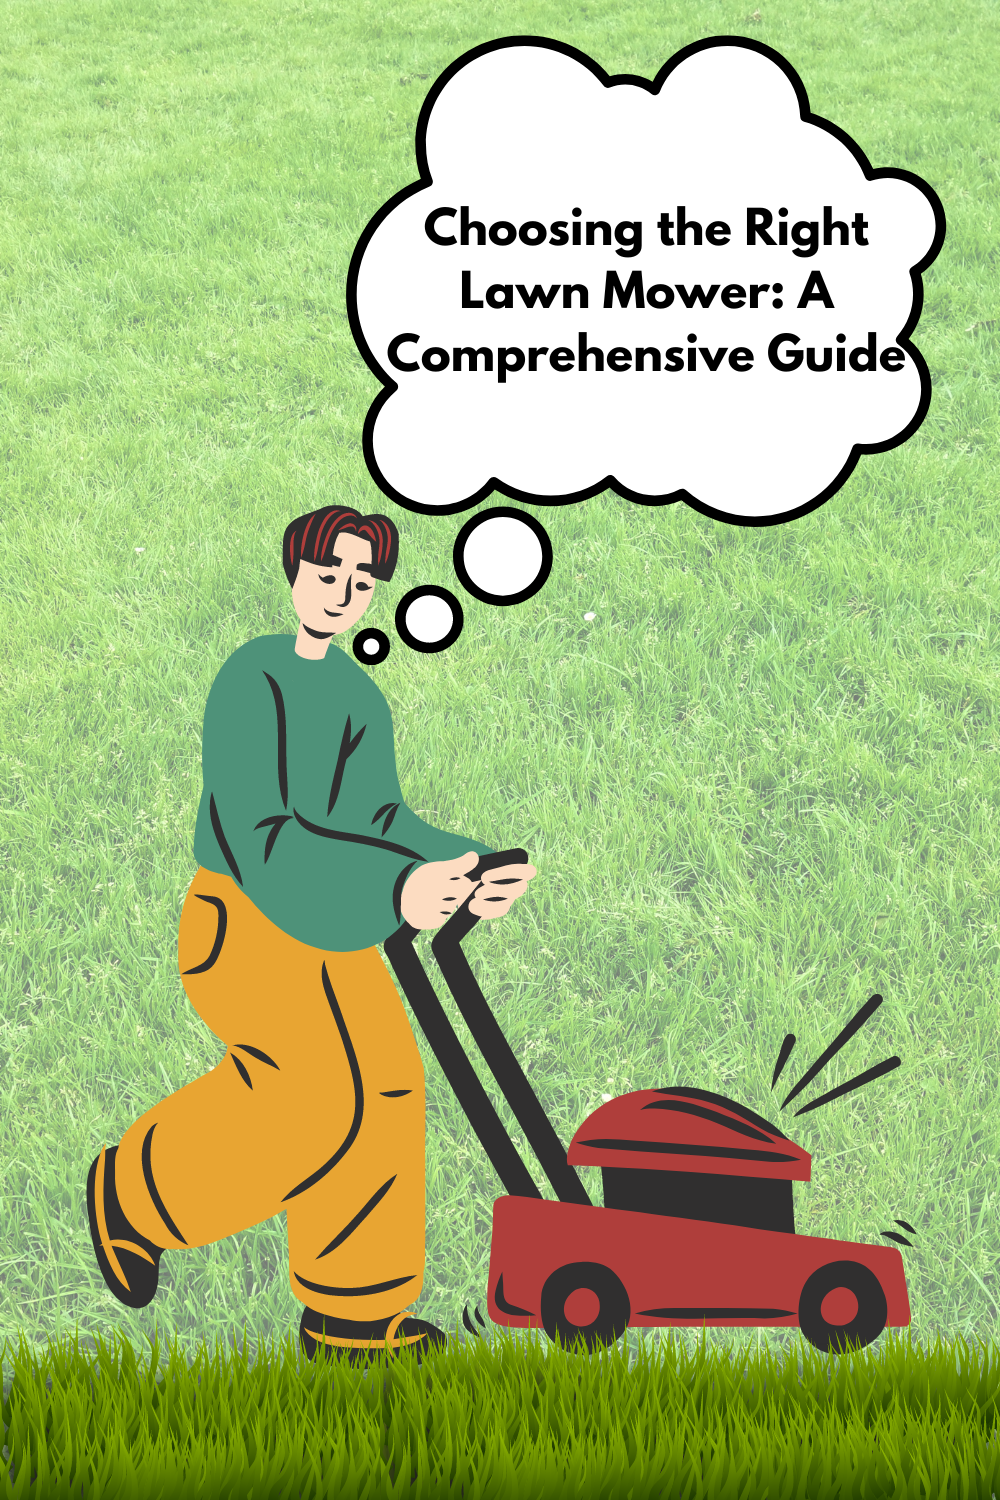 Choosing the Right Lawn Mower: A Comprehensive Guide